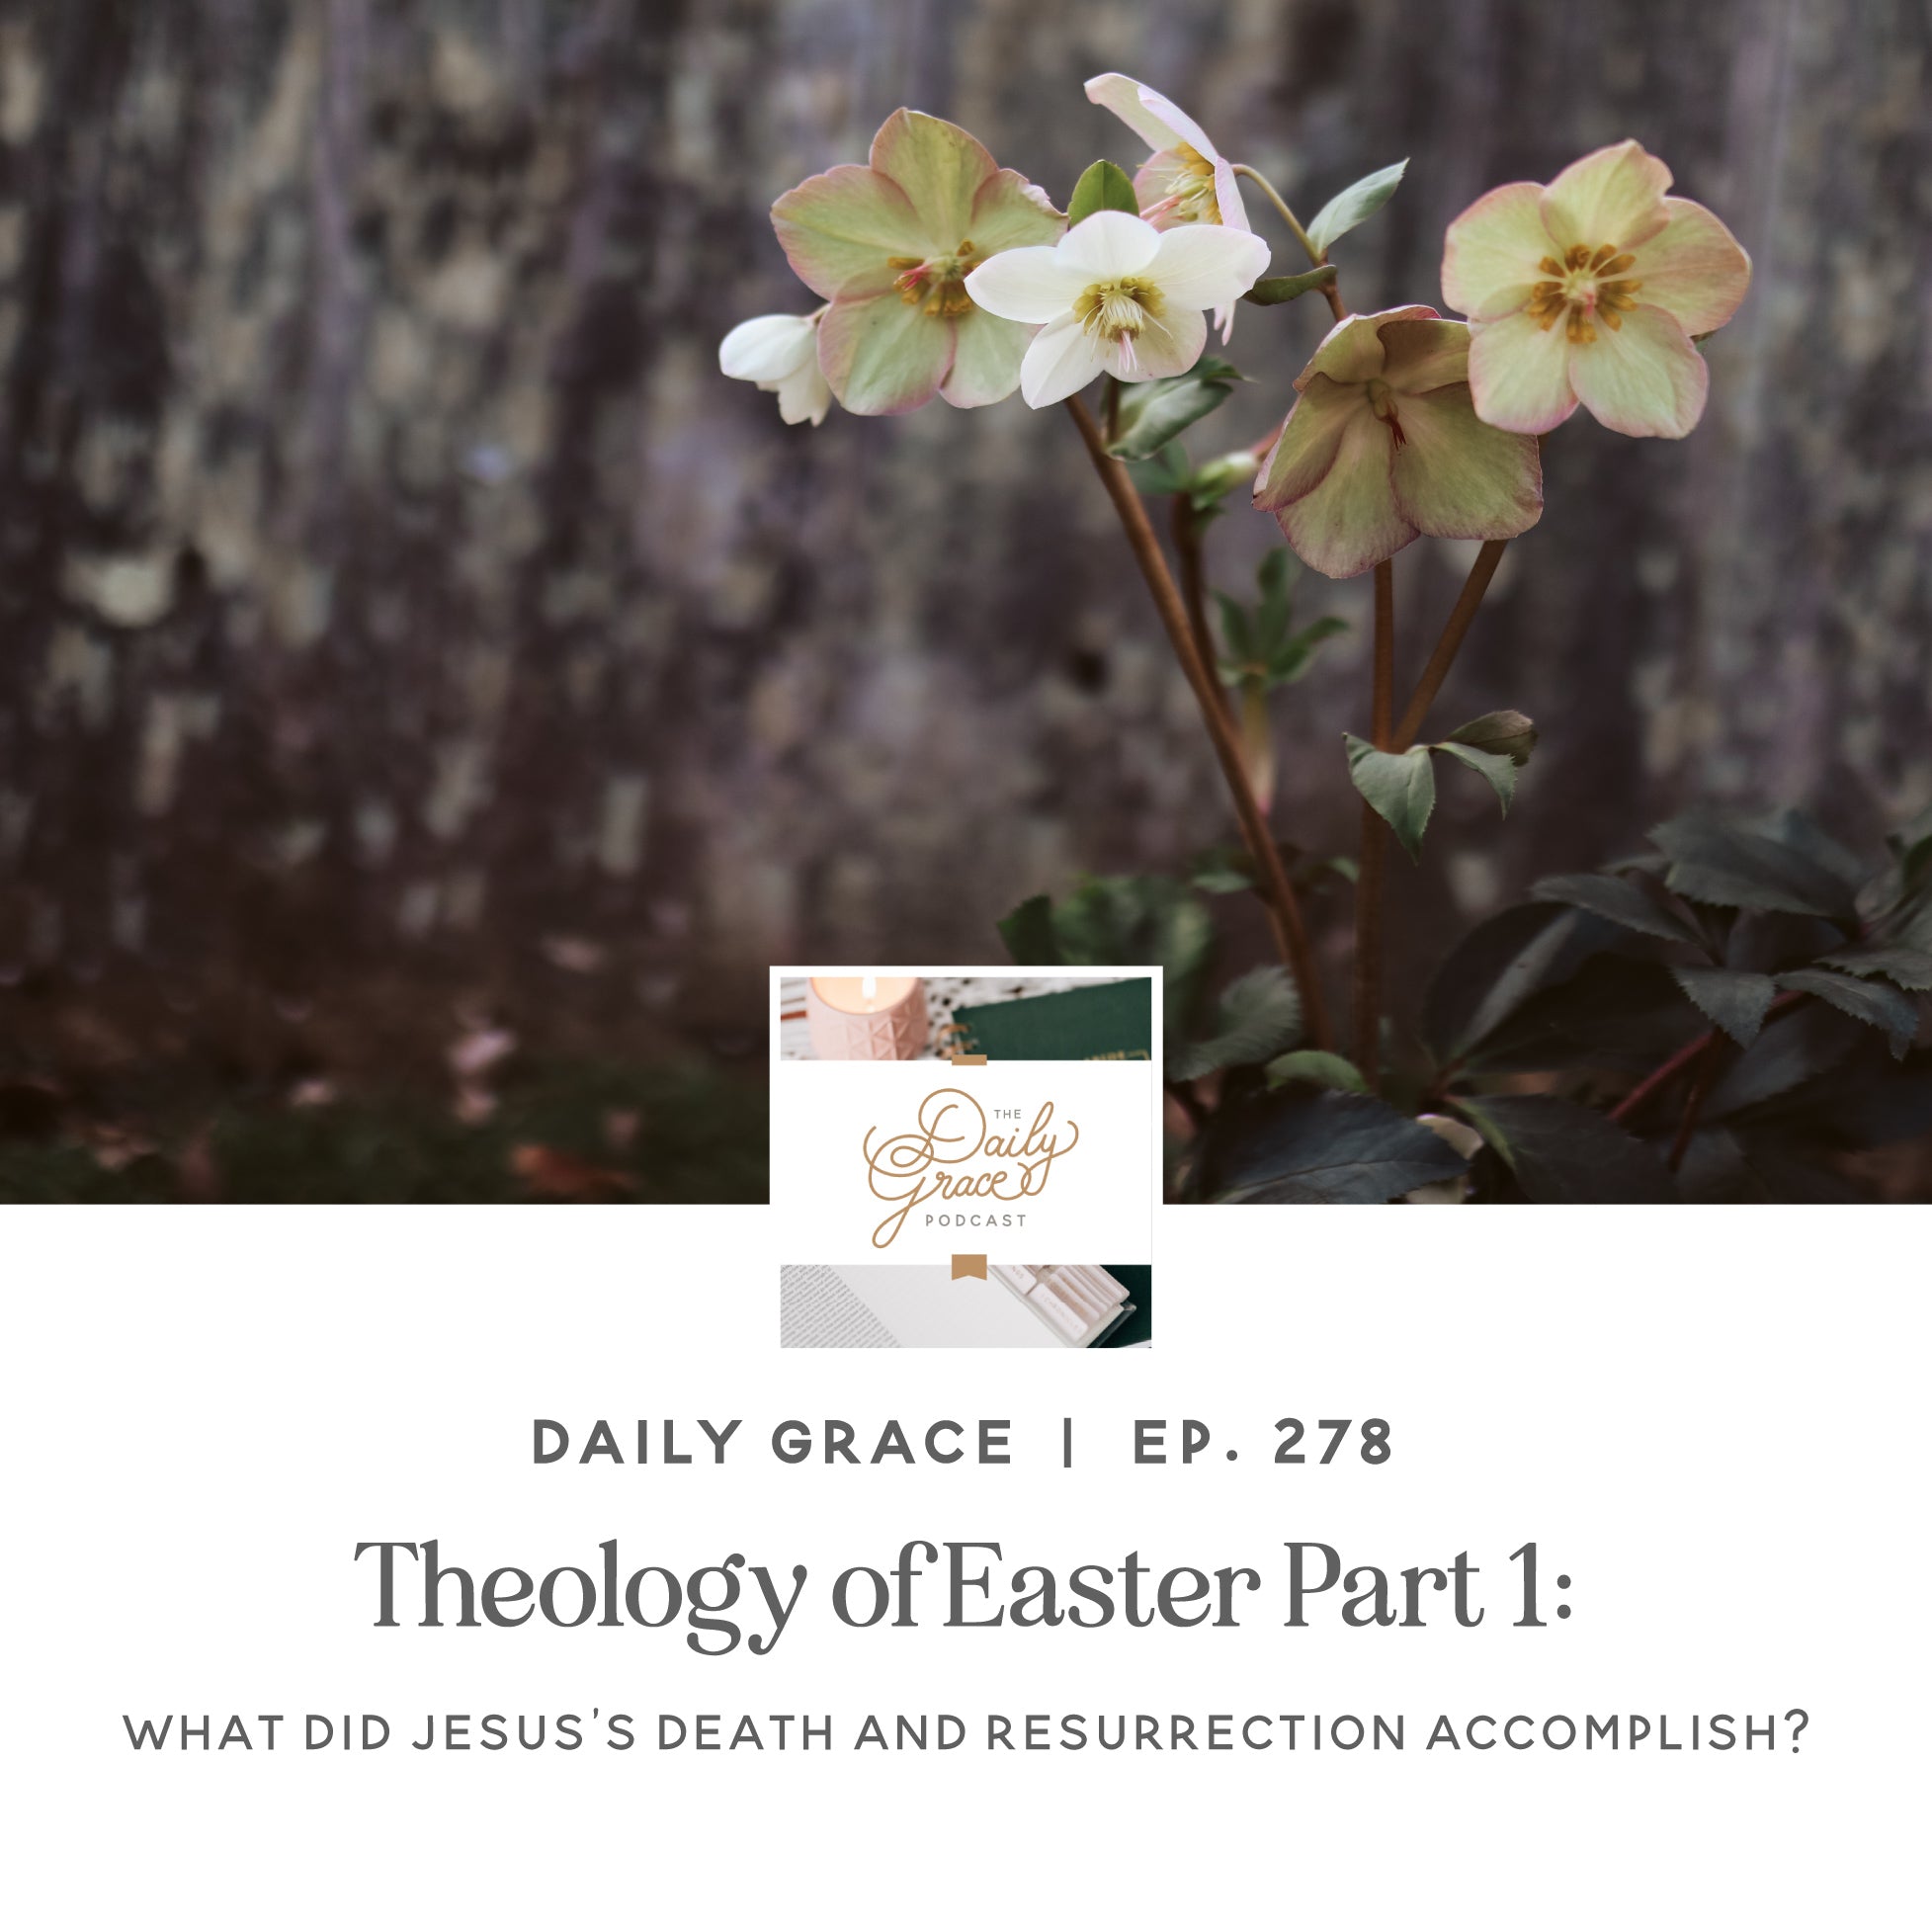 Theology of Easter Part 1: What Did Jesus’s Death and Resurrection Accomplish? Ep. 278 | TDGC